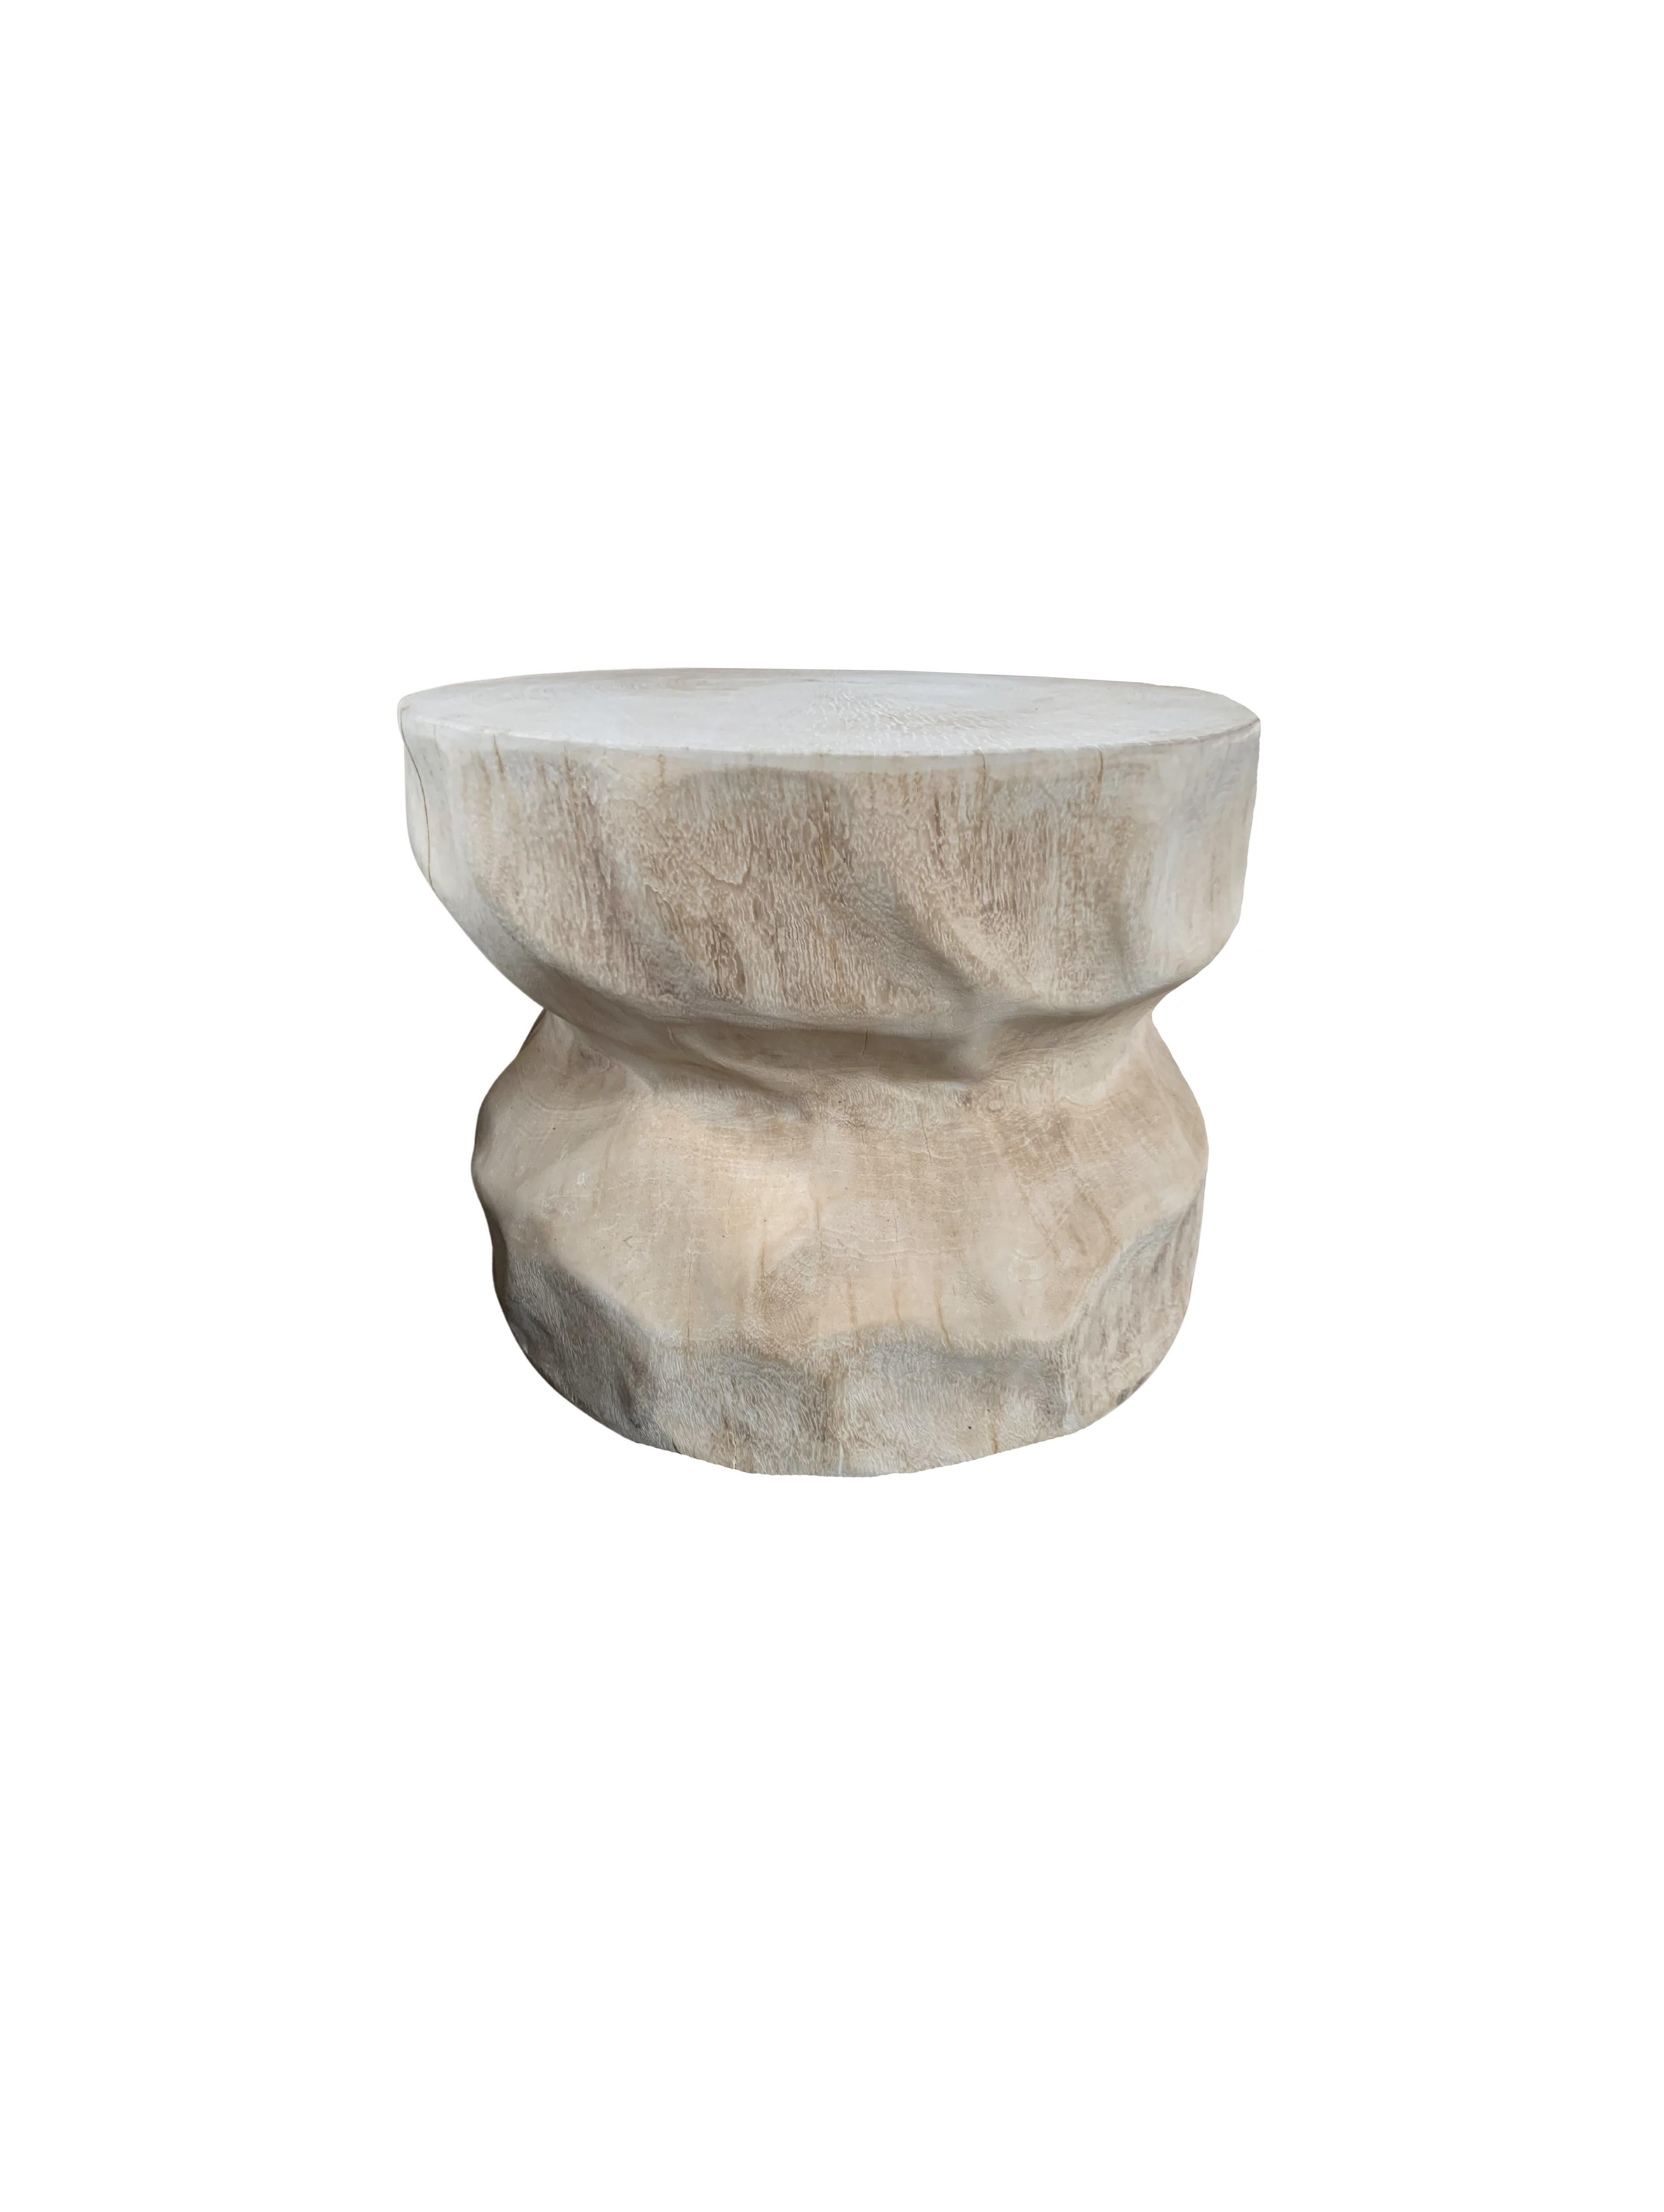 Hand-Crafted Sculptural Round Side Table Mango Wood, Modern Organic For Sale